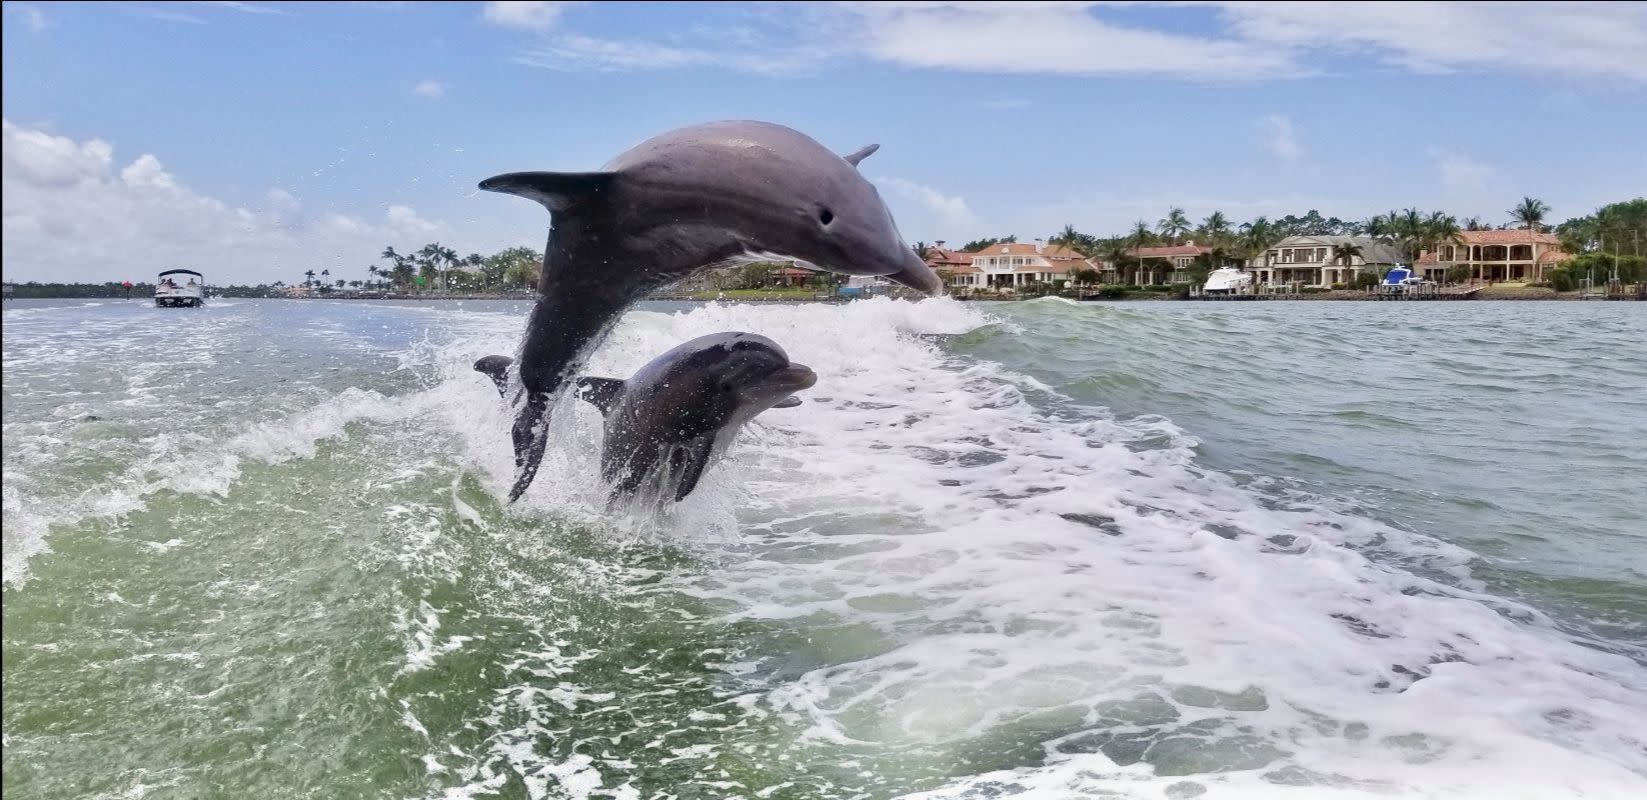 Two Dolphins jumping in the waves